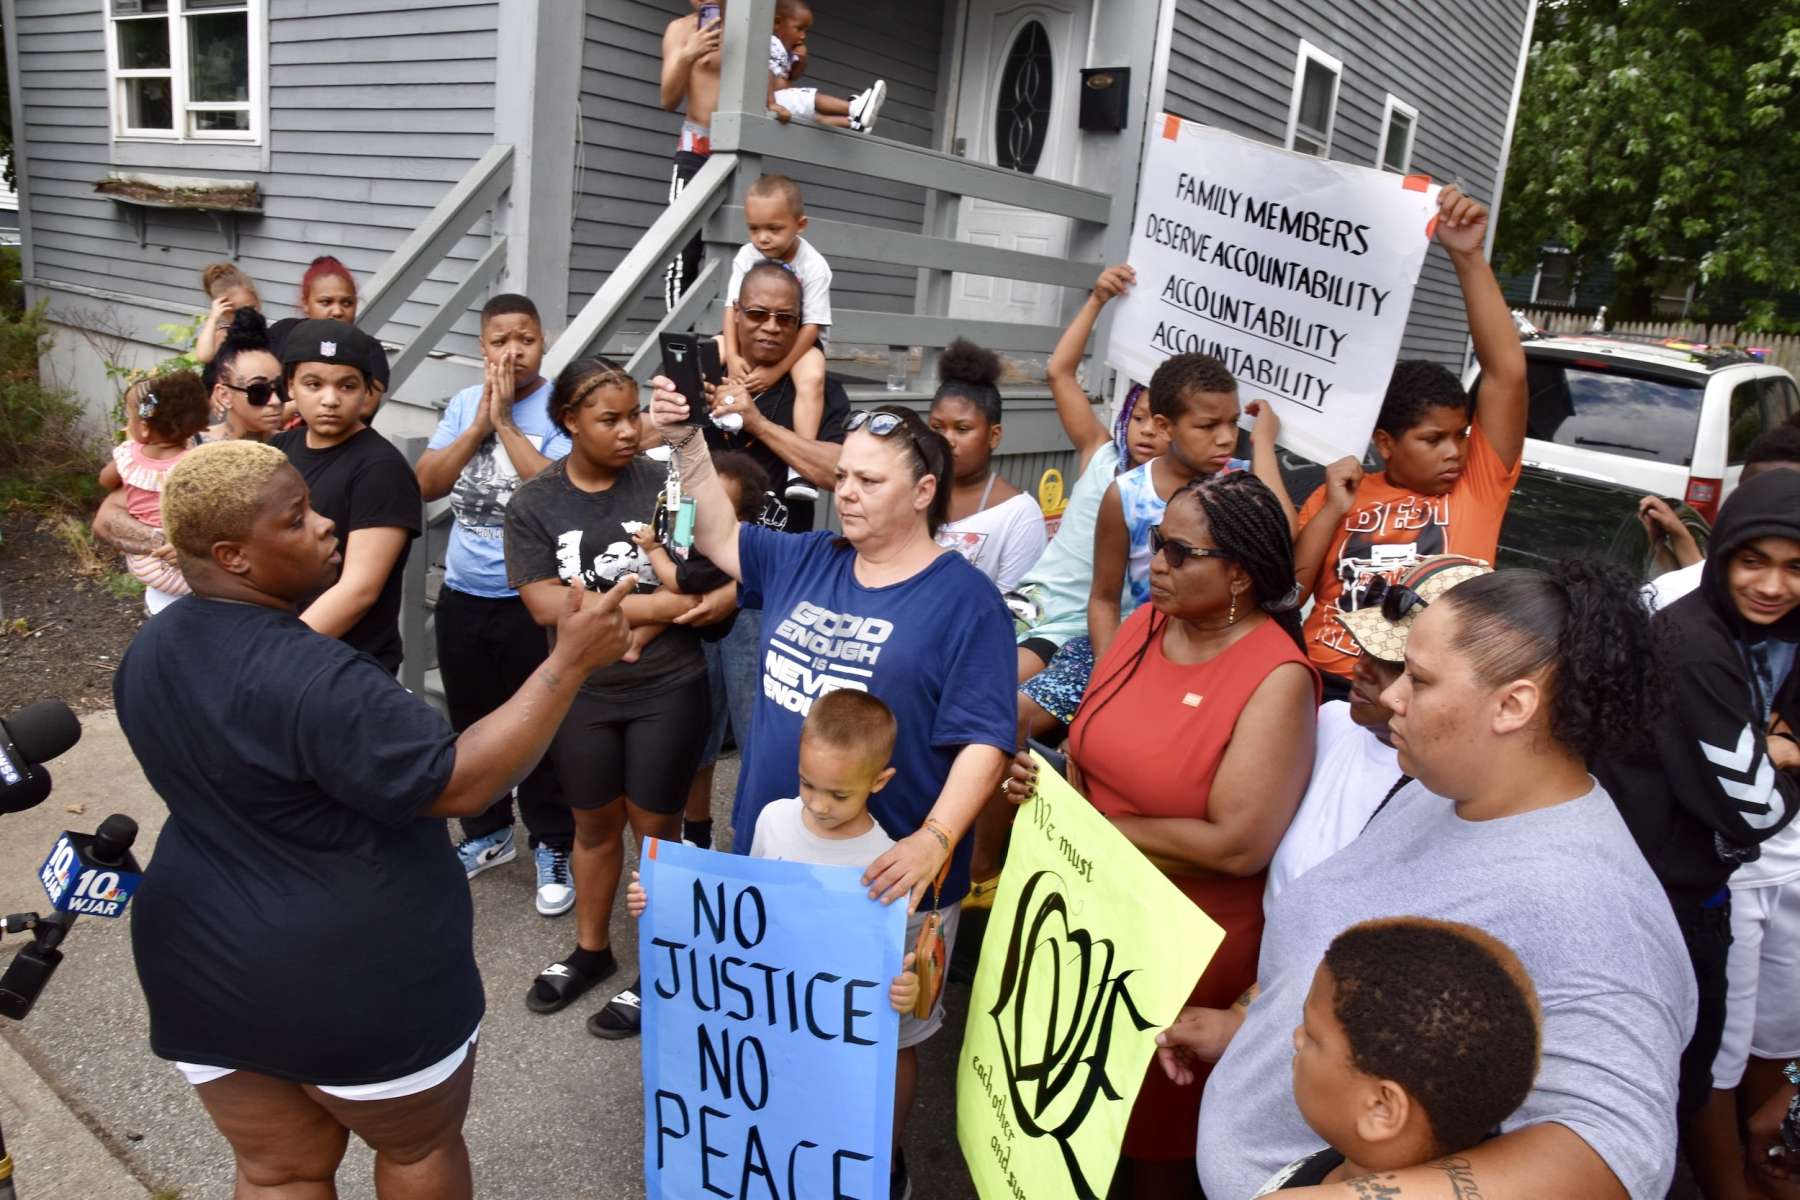 Rhode Island News: Parents hold press conference after police beat, pepper spray and arrest their children